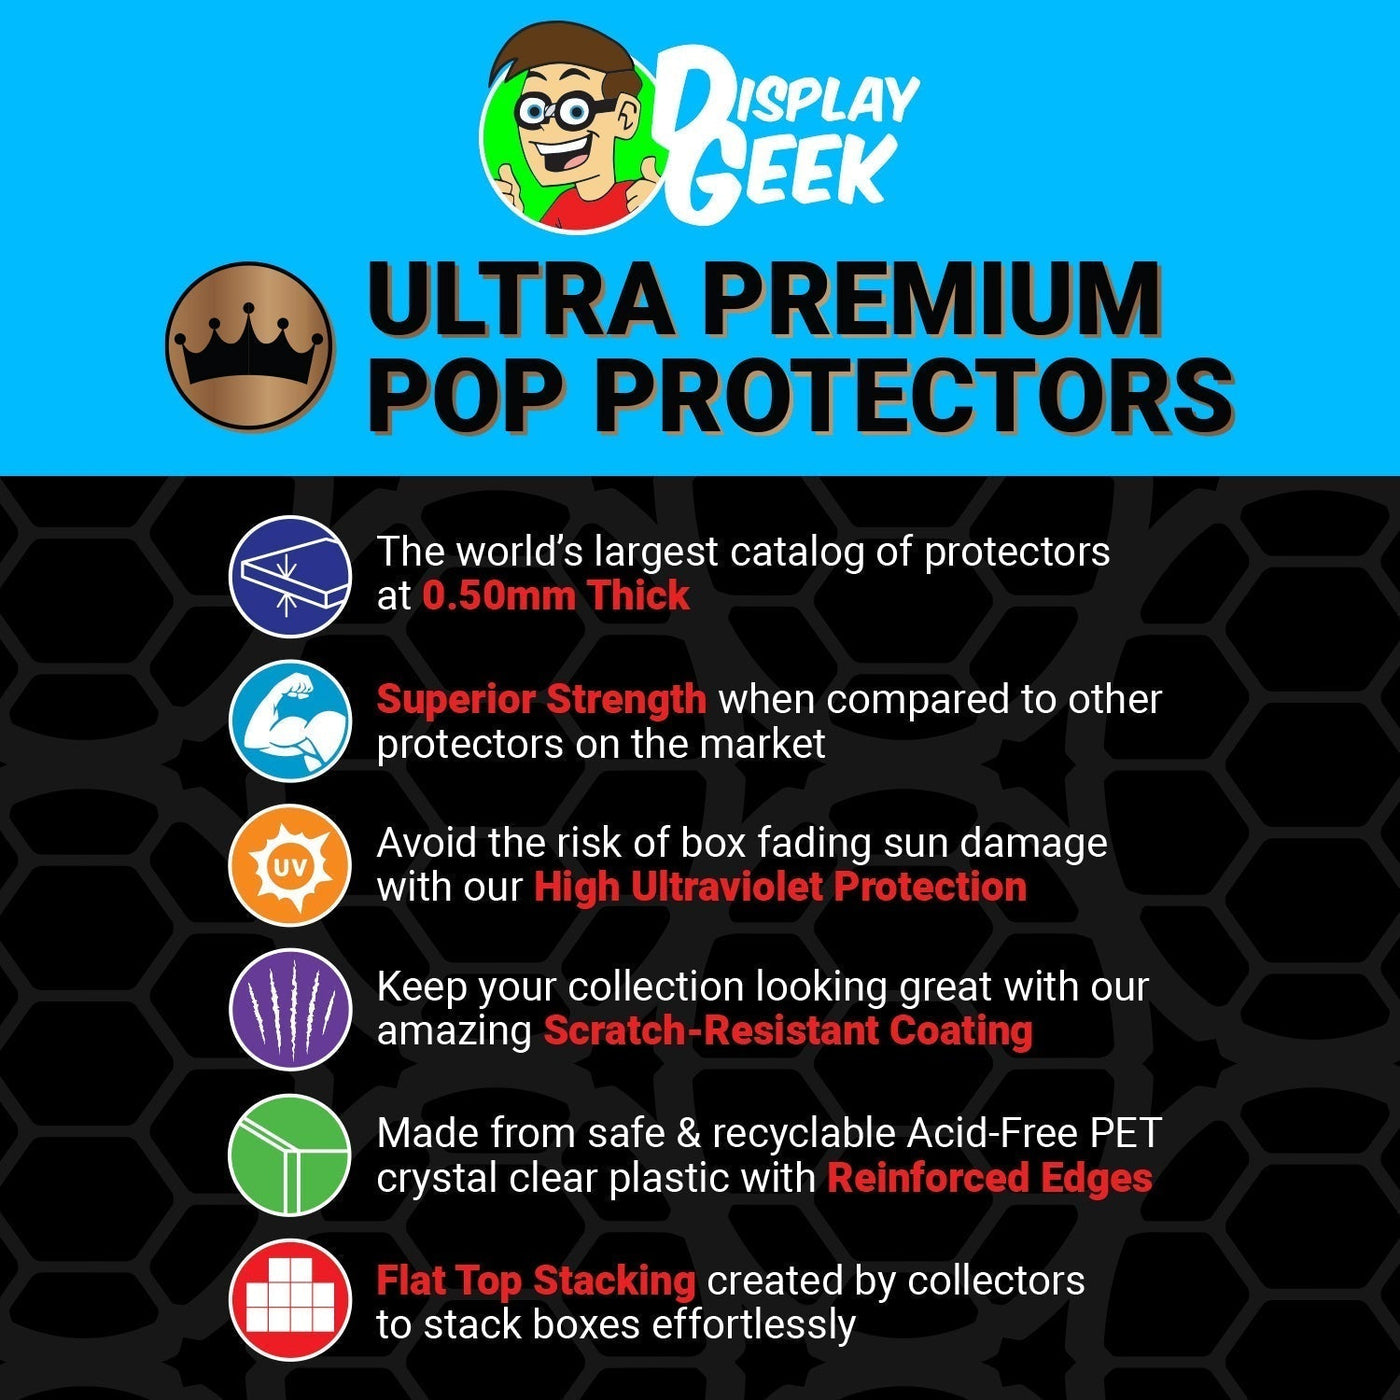 Pop Protector for Grogu Using the Force Lights & Sound #485 Funko Pop Deluxe on The Protector Guide App by Display Geek